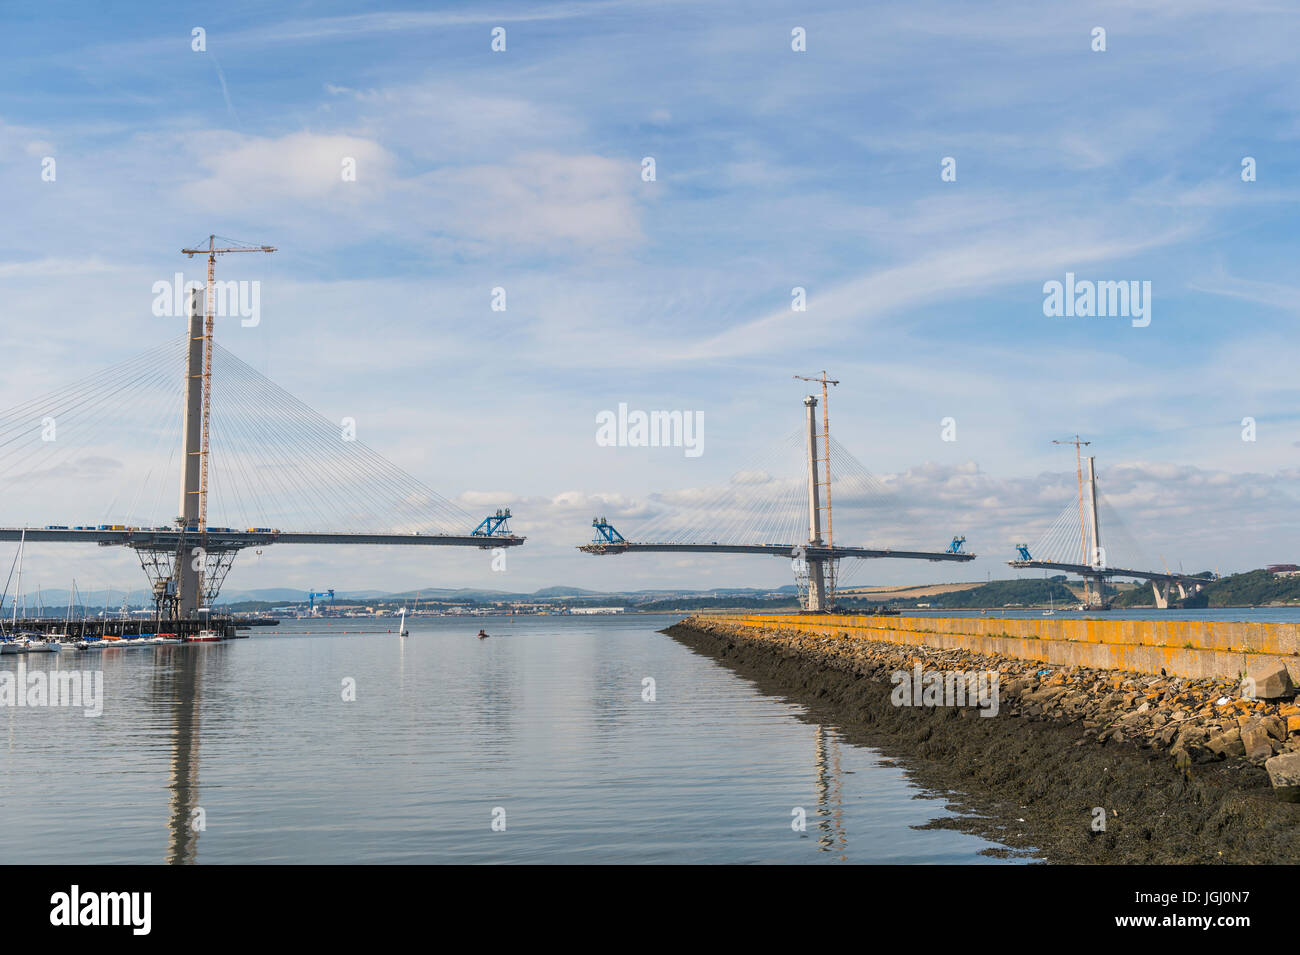 Queensferry, Scotland, Uk - August 15, 2016: The new Forth Road Bridge over the Firth of Forth, South Queensferry. Stock Photo